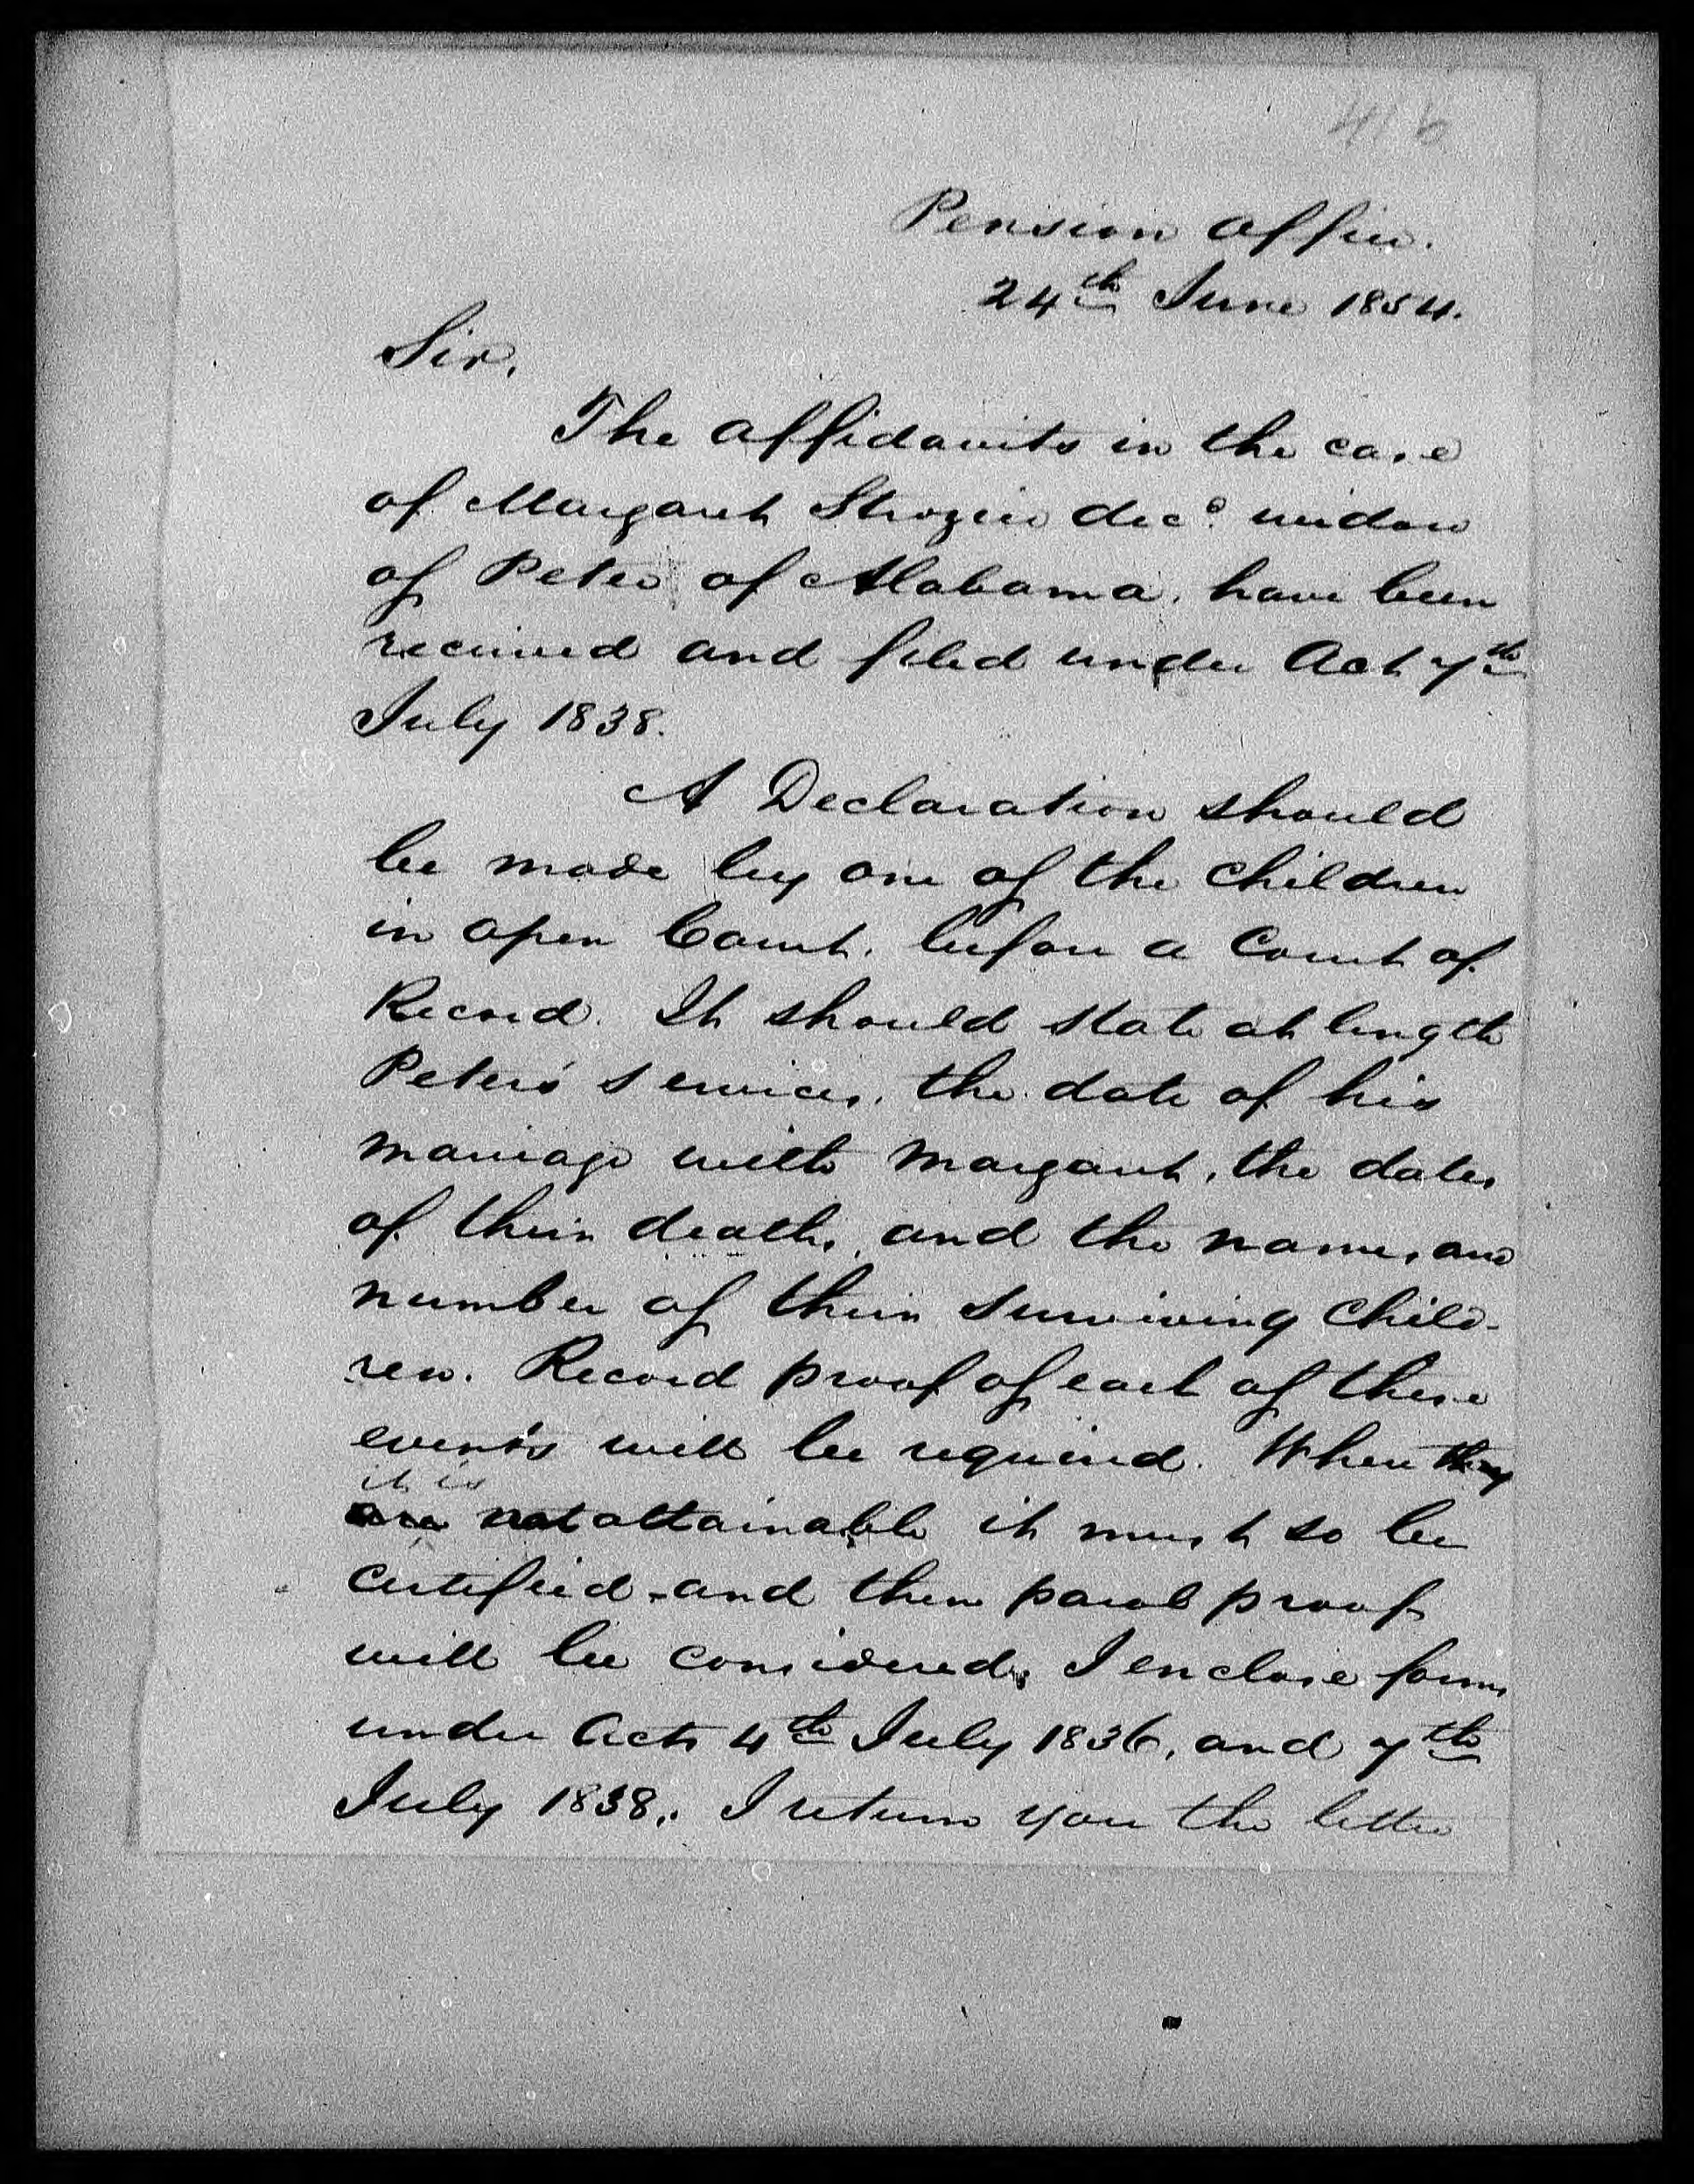 Letter from the U.S. Pension Office to J. F. Dowdell, 24 June 1854, page 1